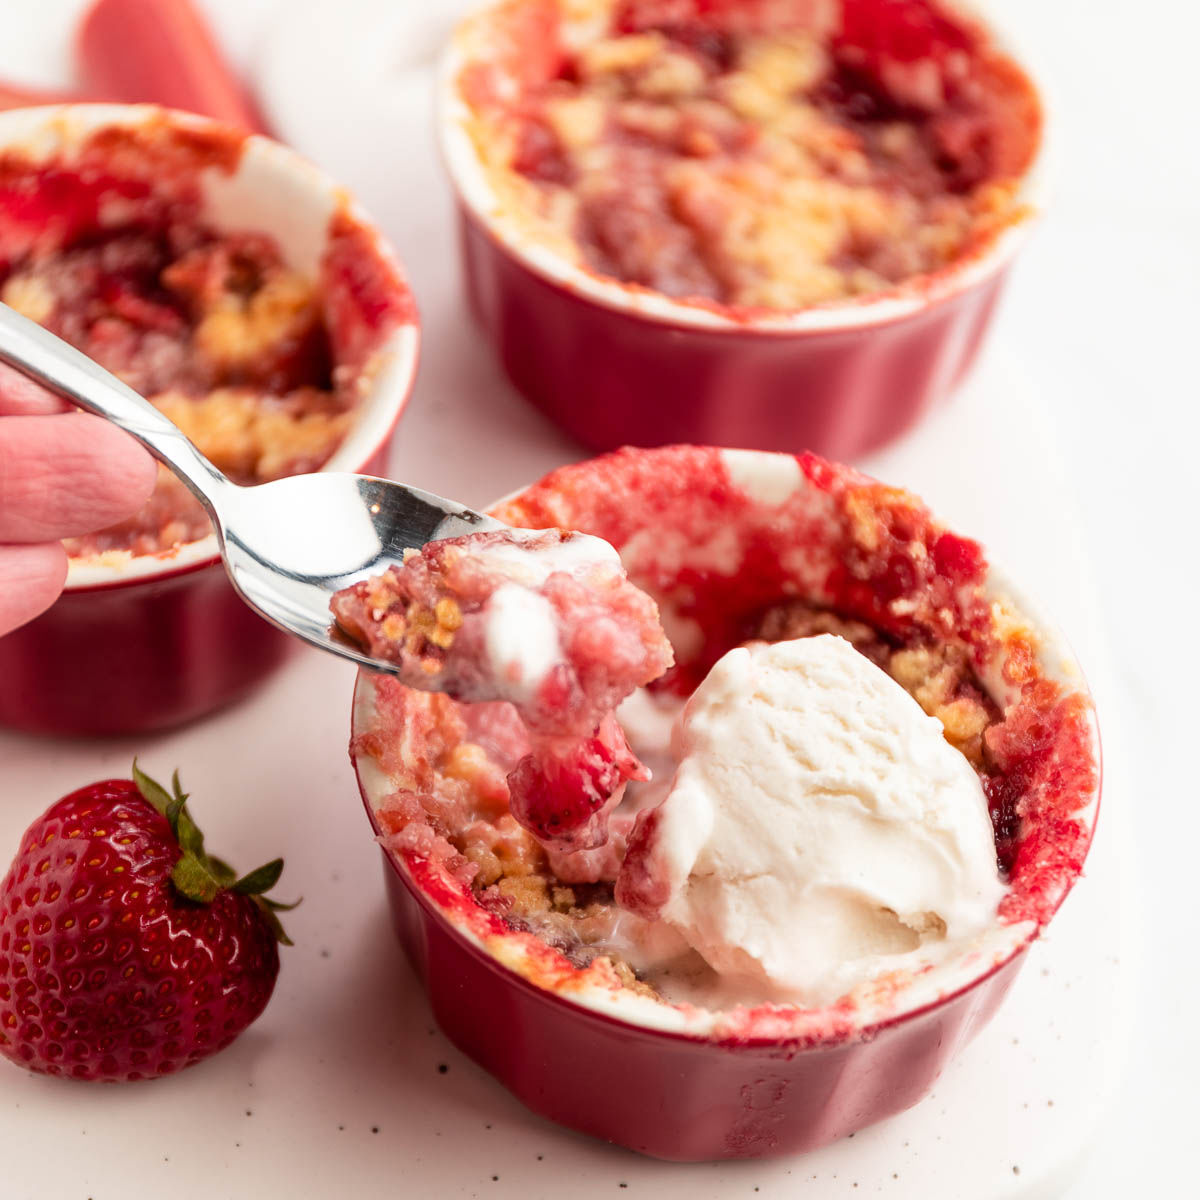 Strawbeery rhubarb crisp with a spoonful coming out of the crisp.